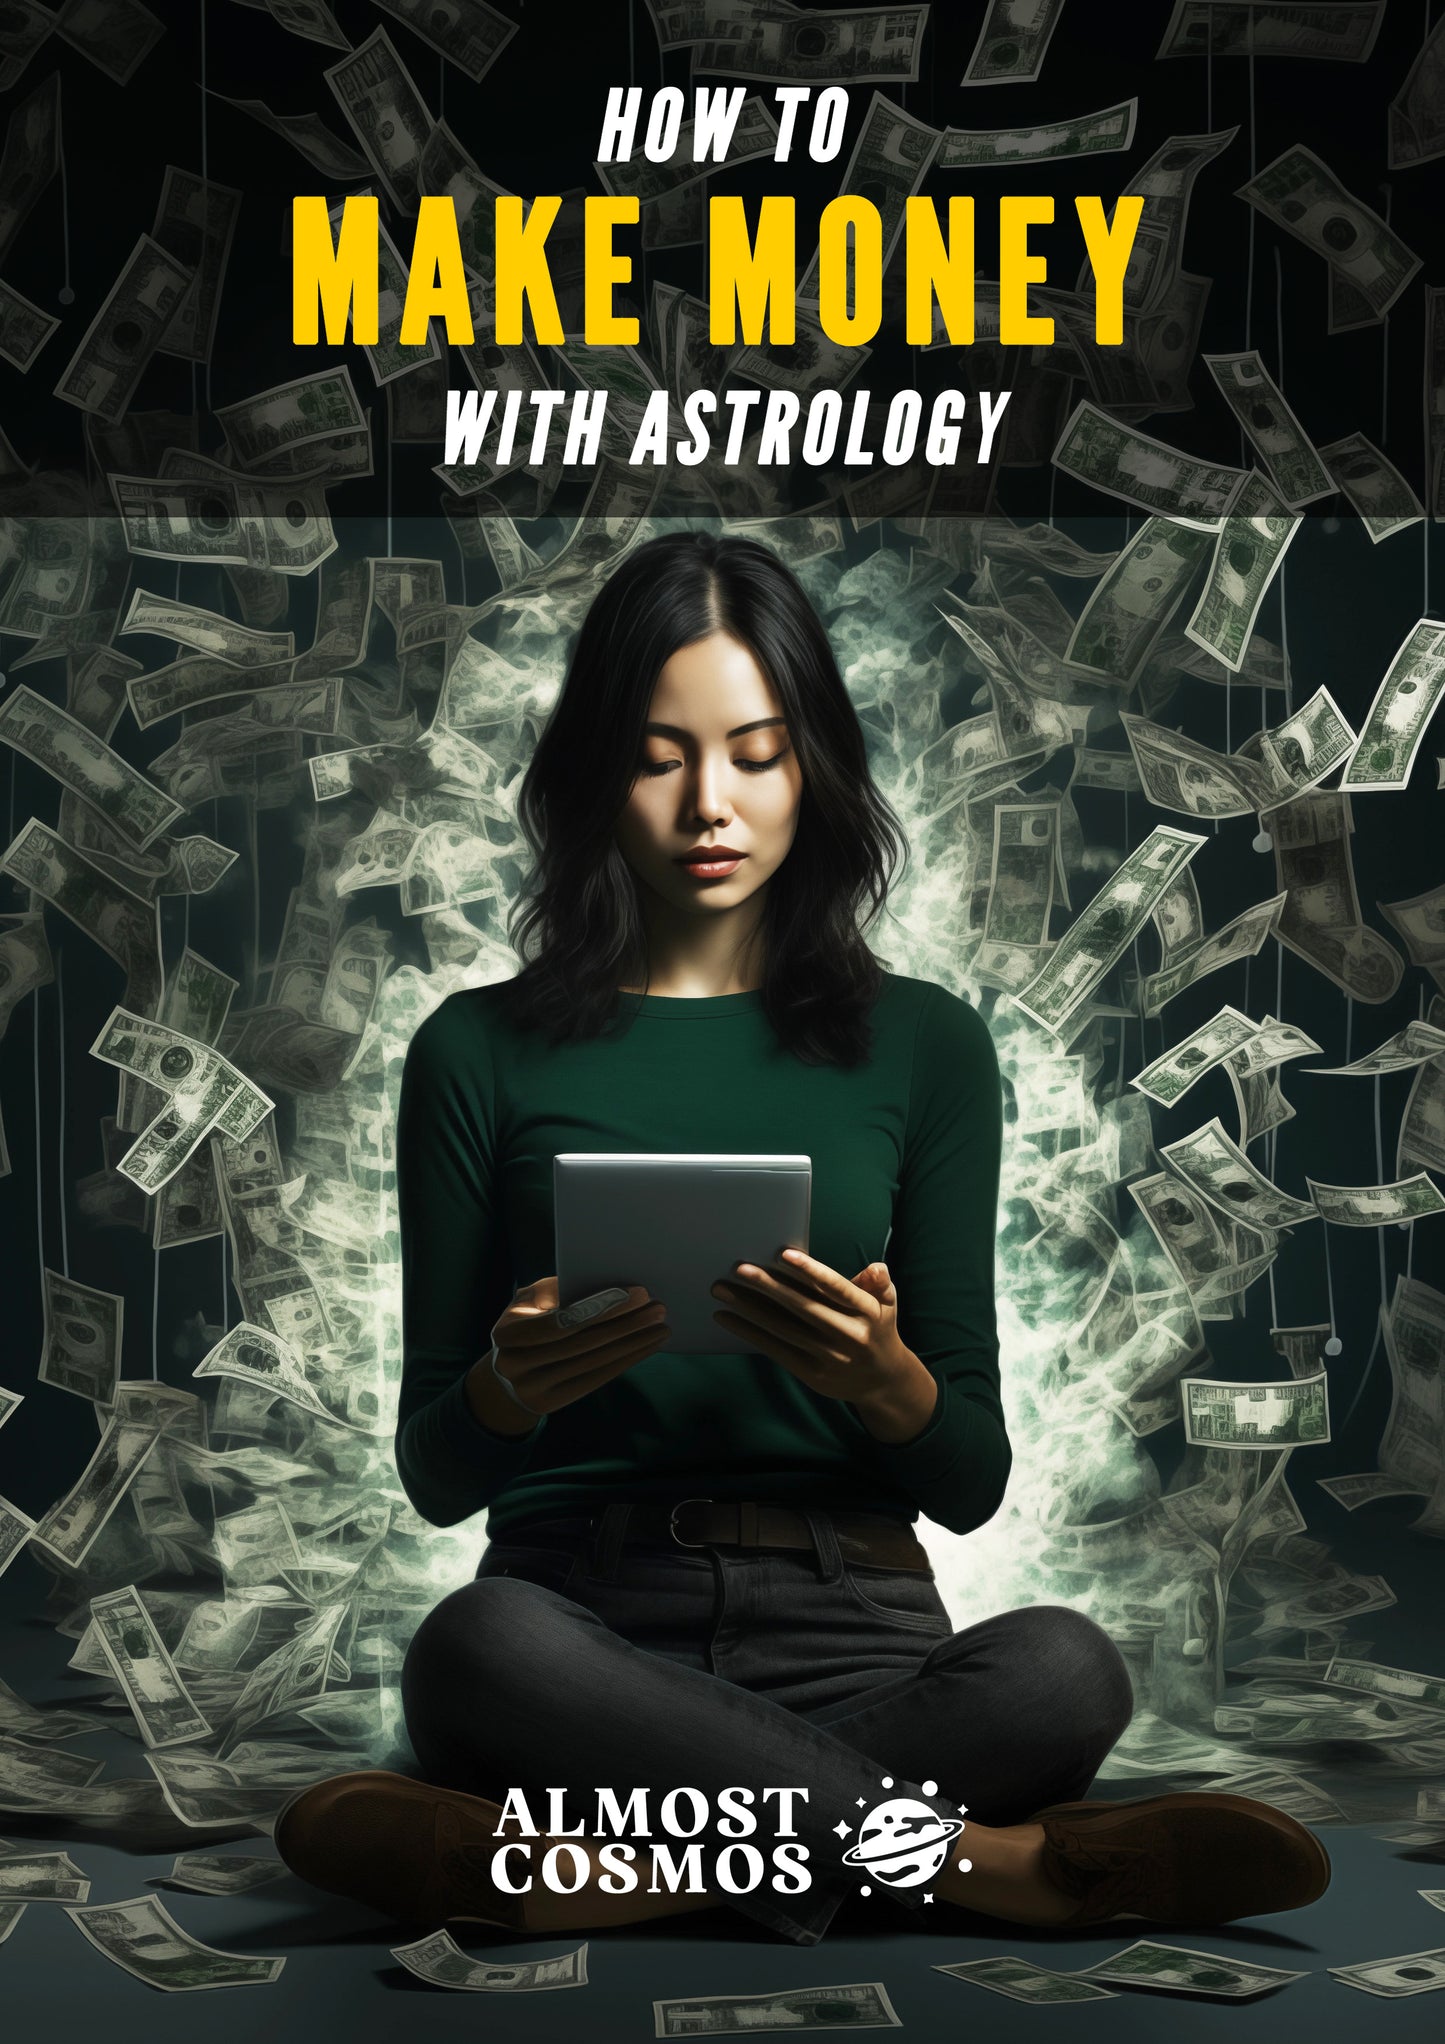 How to Make Money With Astrology Guide